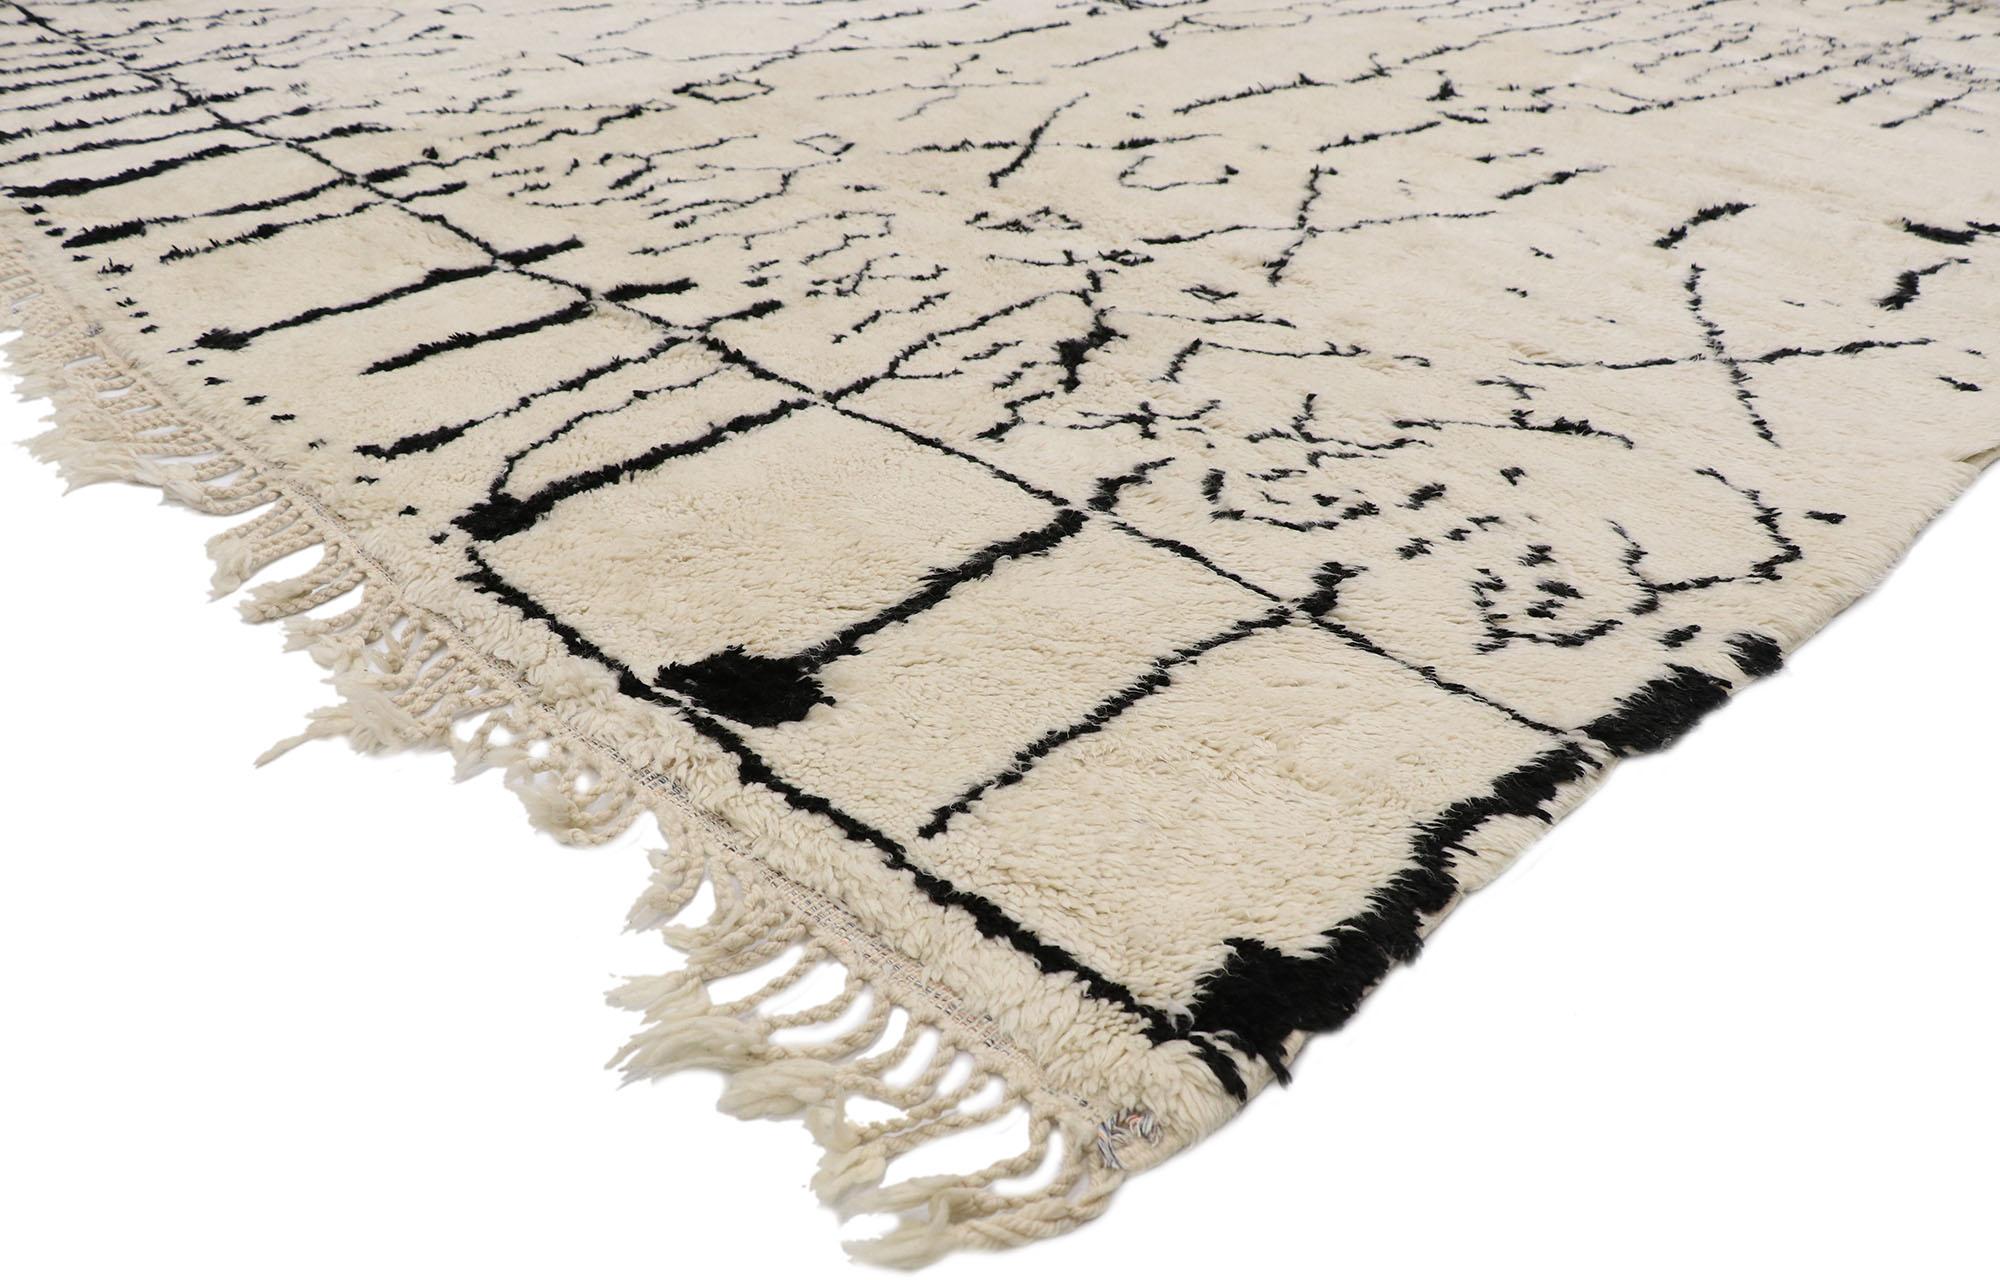 21098 New Contemporary Berber Moroccan rug Inspired by Cy Twombly 12'04 x 13'06. With its neutral colors, incredible detail and texture, this hand knotted wool contemporary Moroccan rug can inject just the right amount of visual interest to your